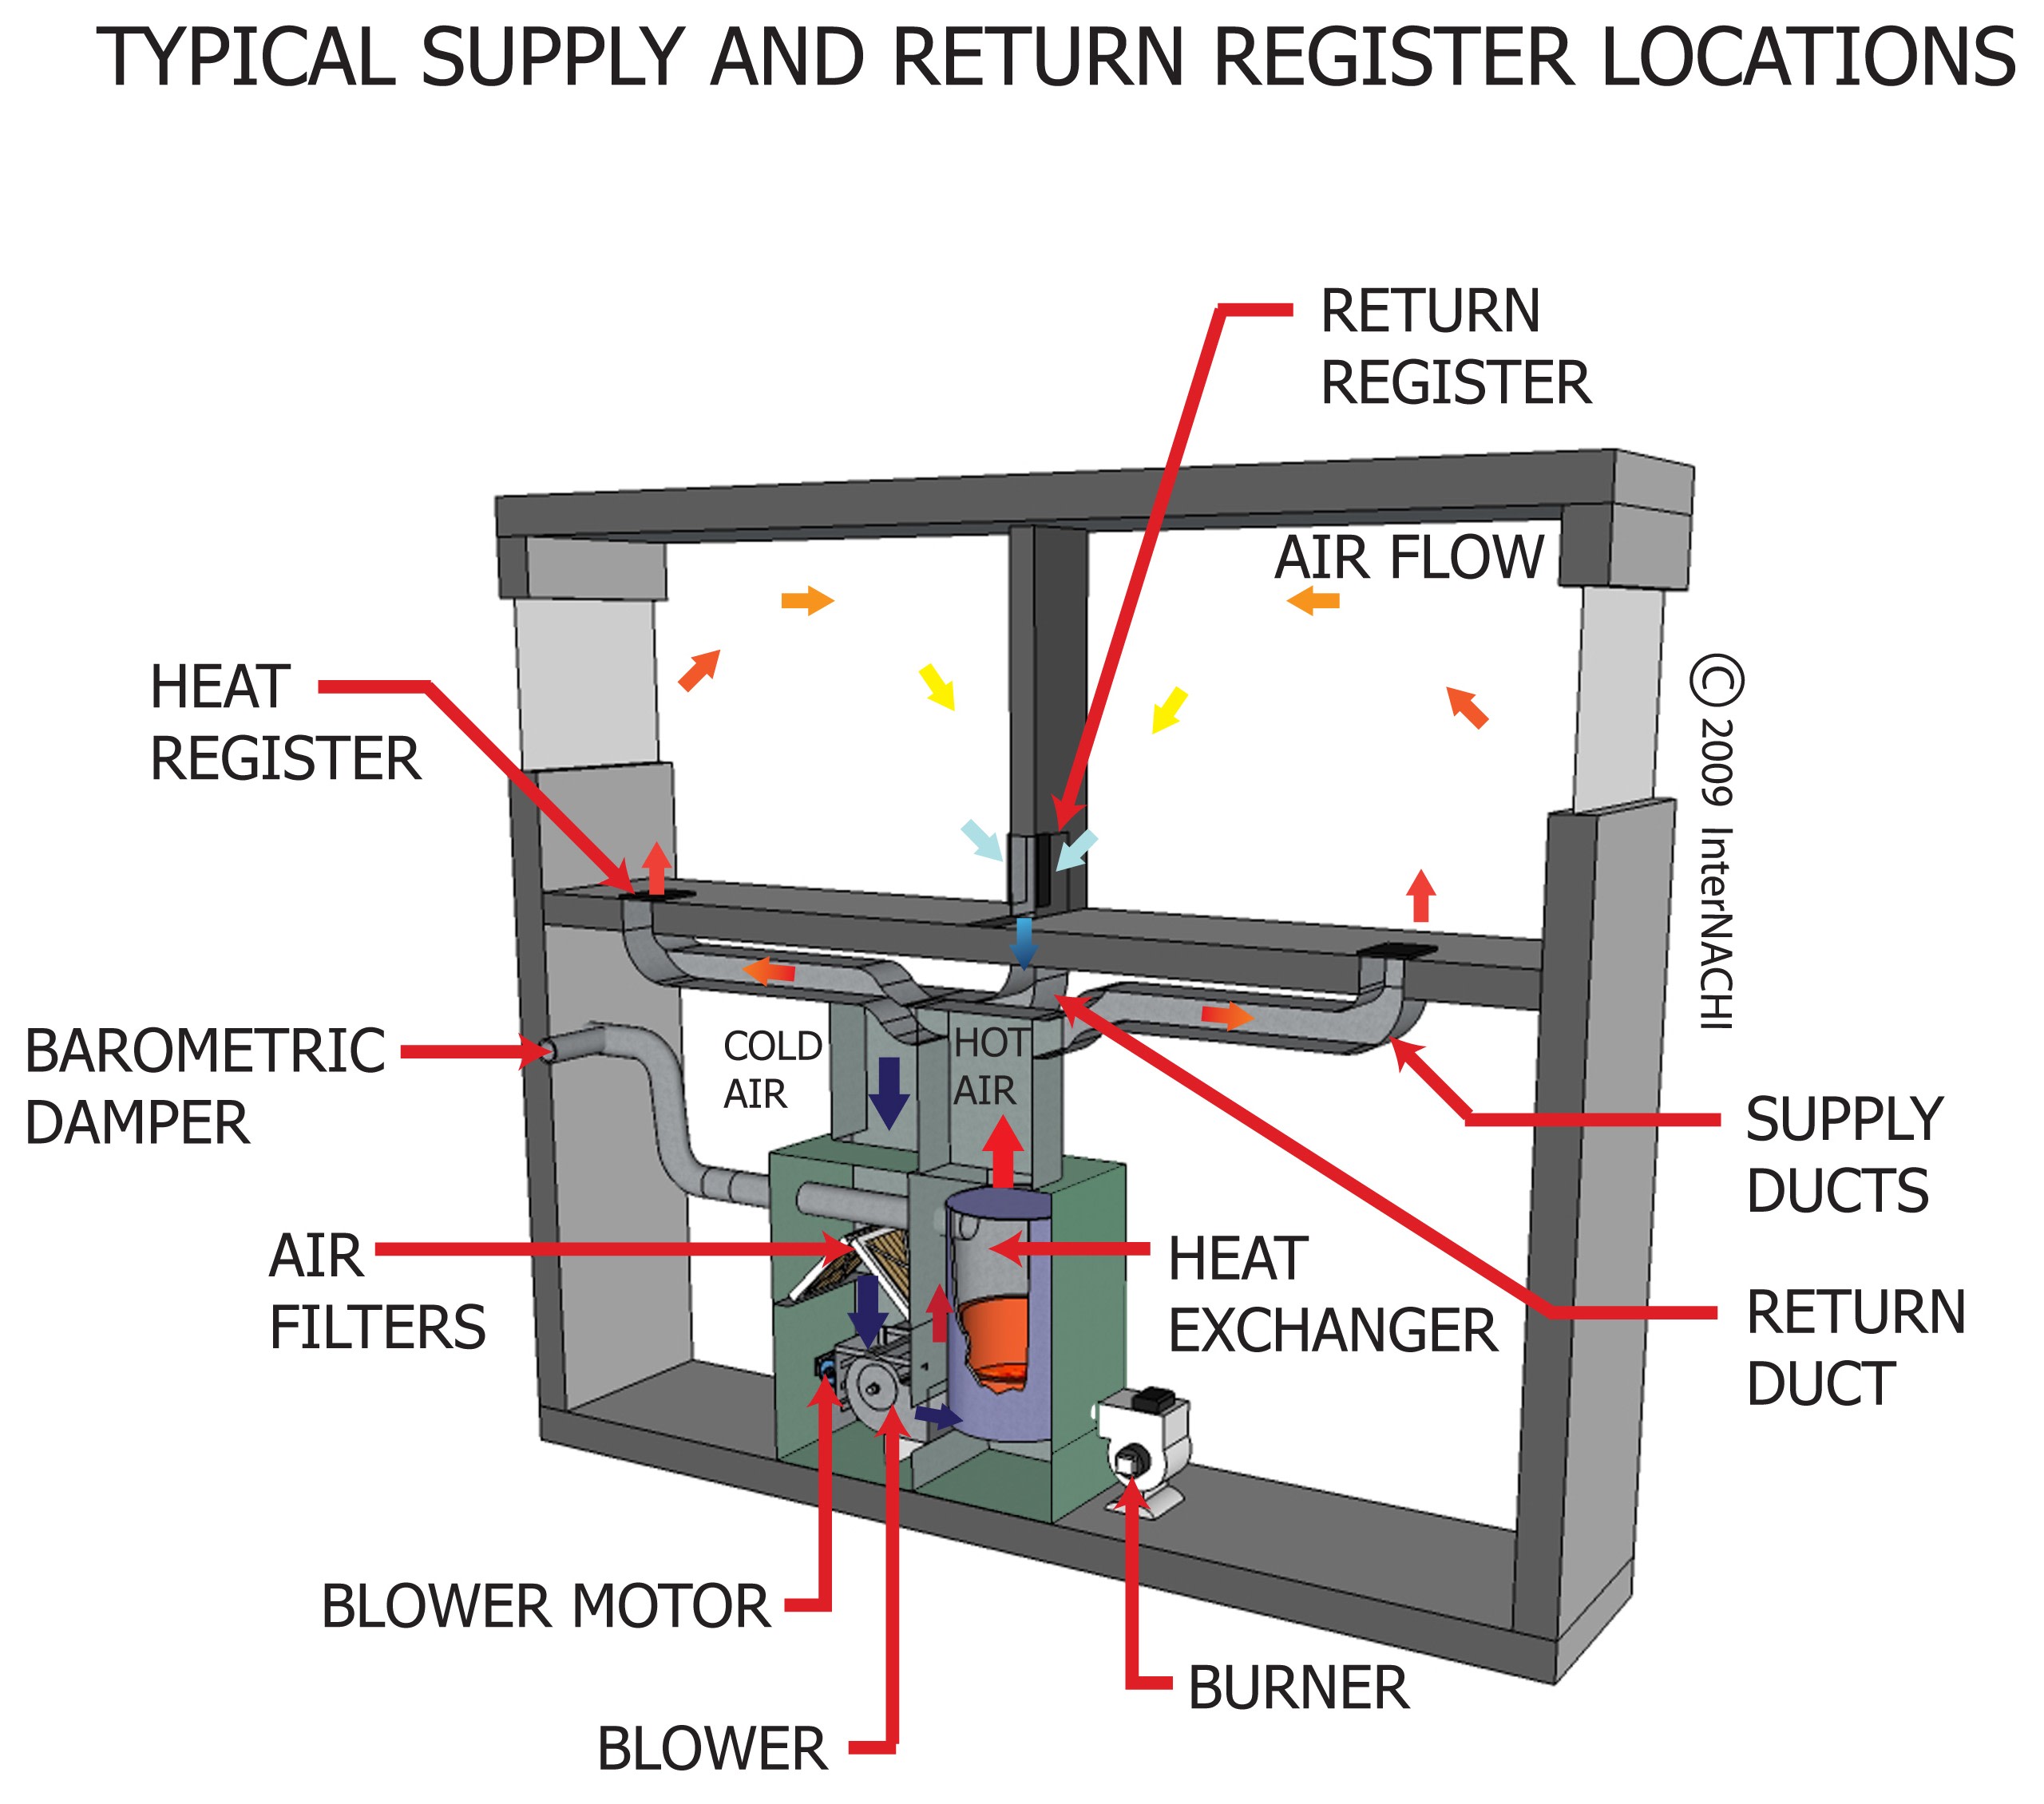 Typical supply and return register locations.